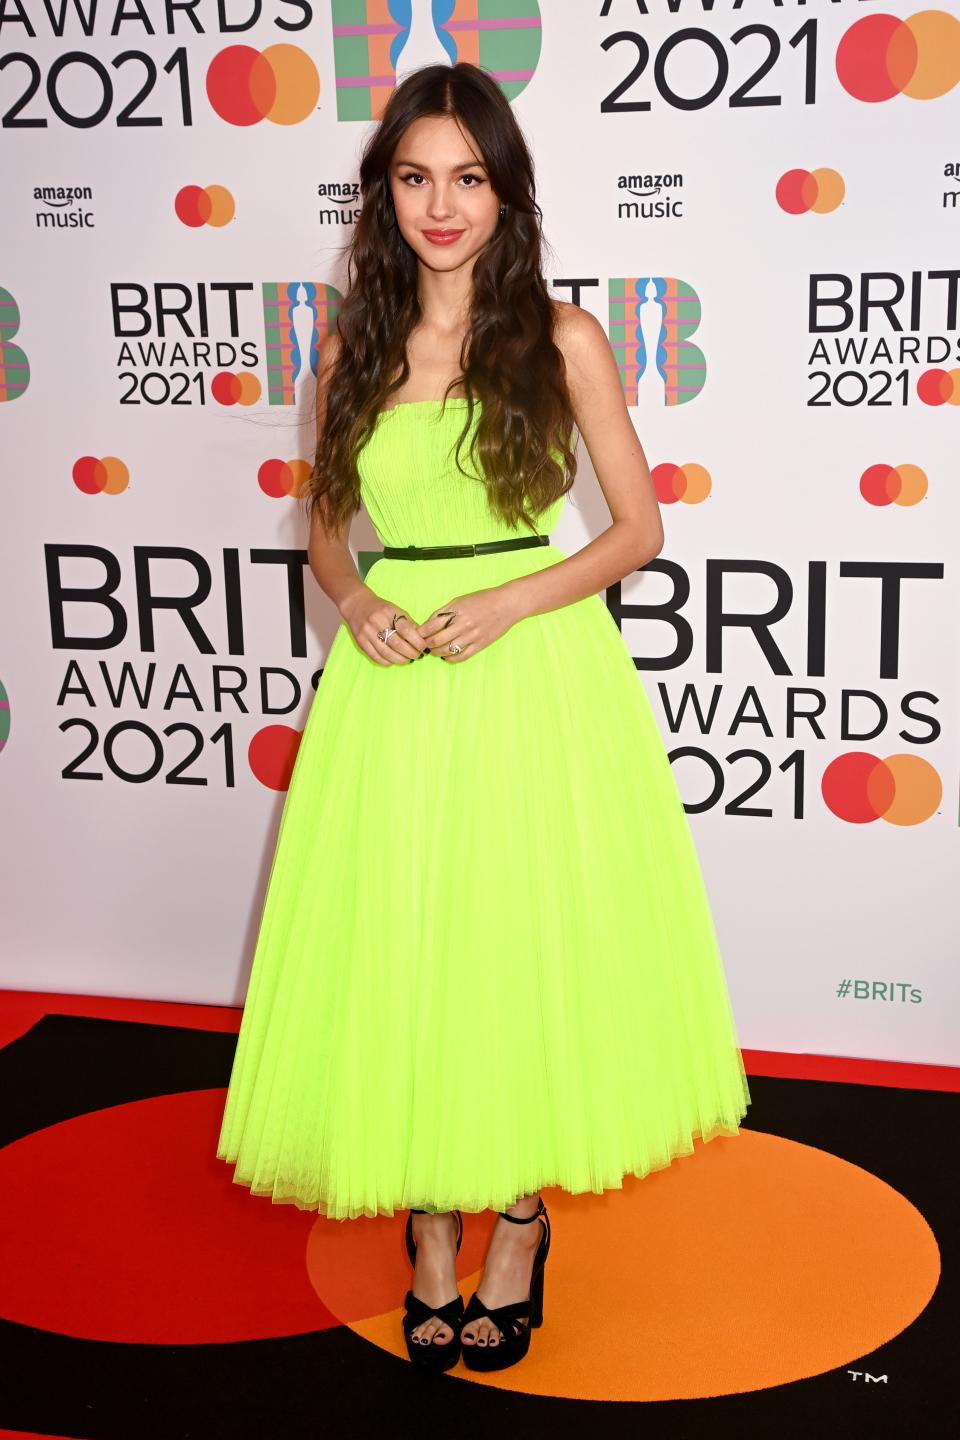 Olivia in a neon green/yellow strapless dress with a full tulle skirt that ends at her ankles. She has a black belt and black platform heels.